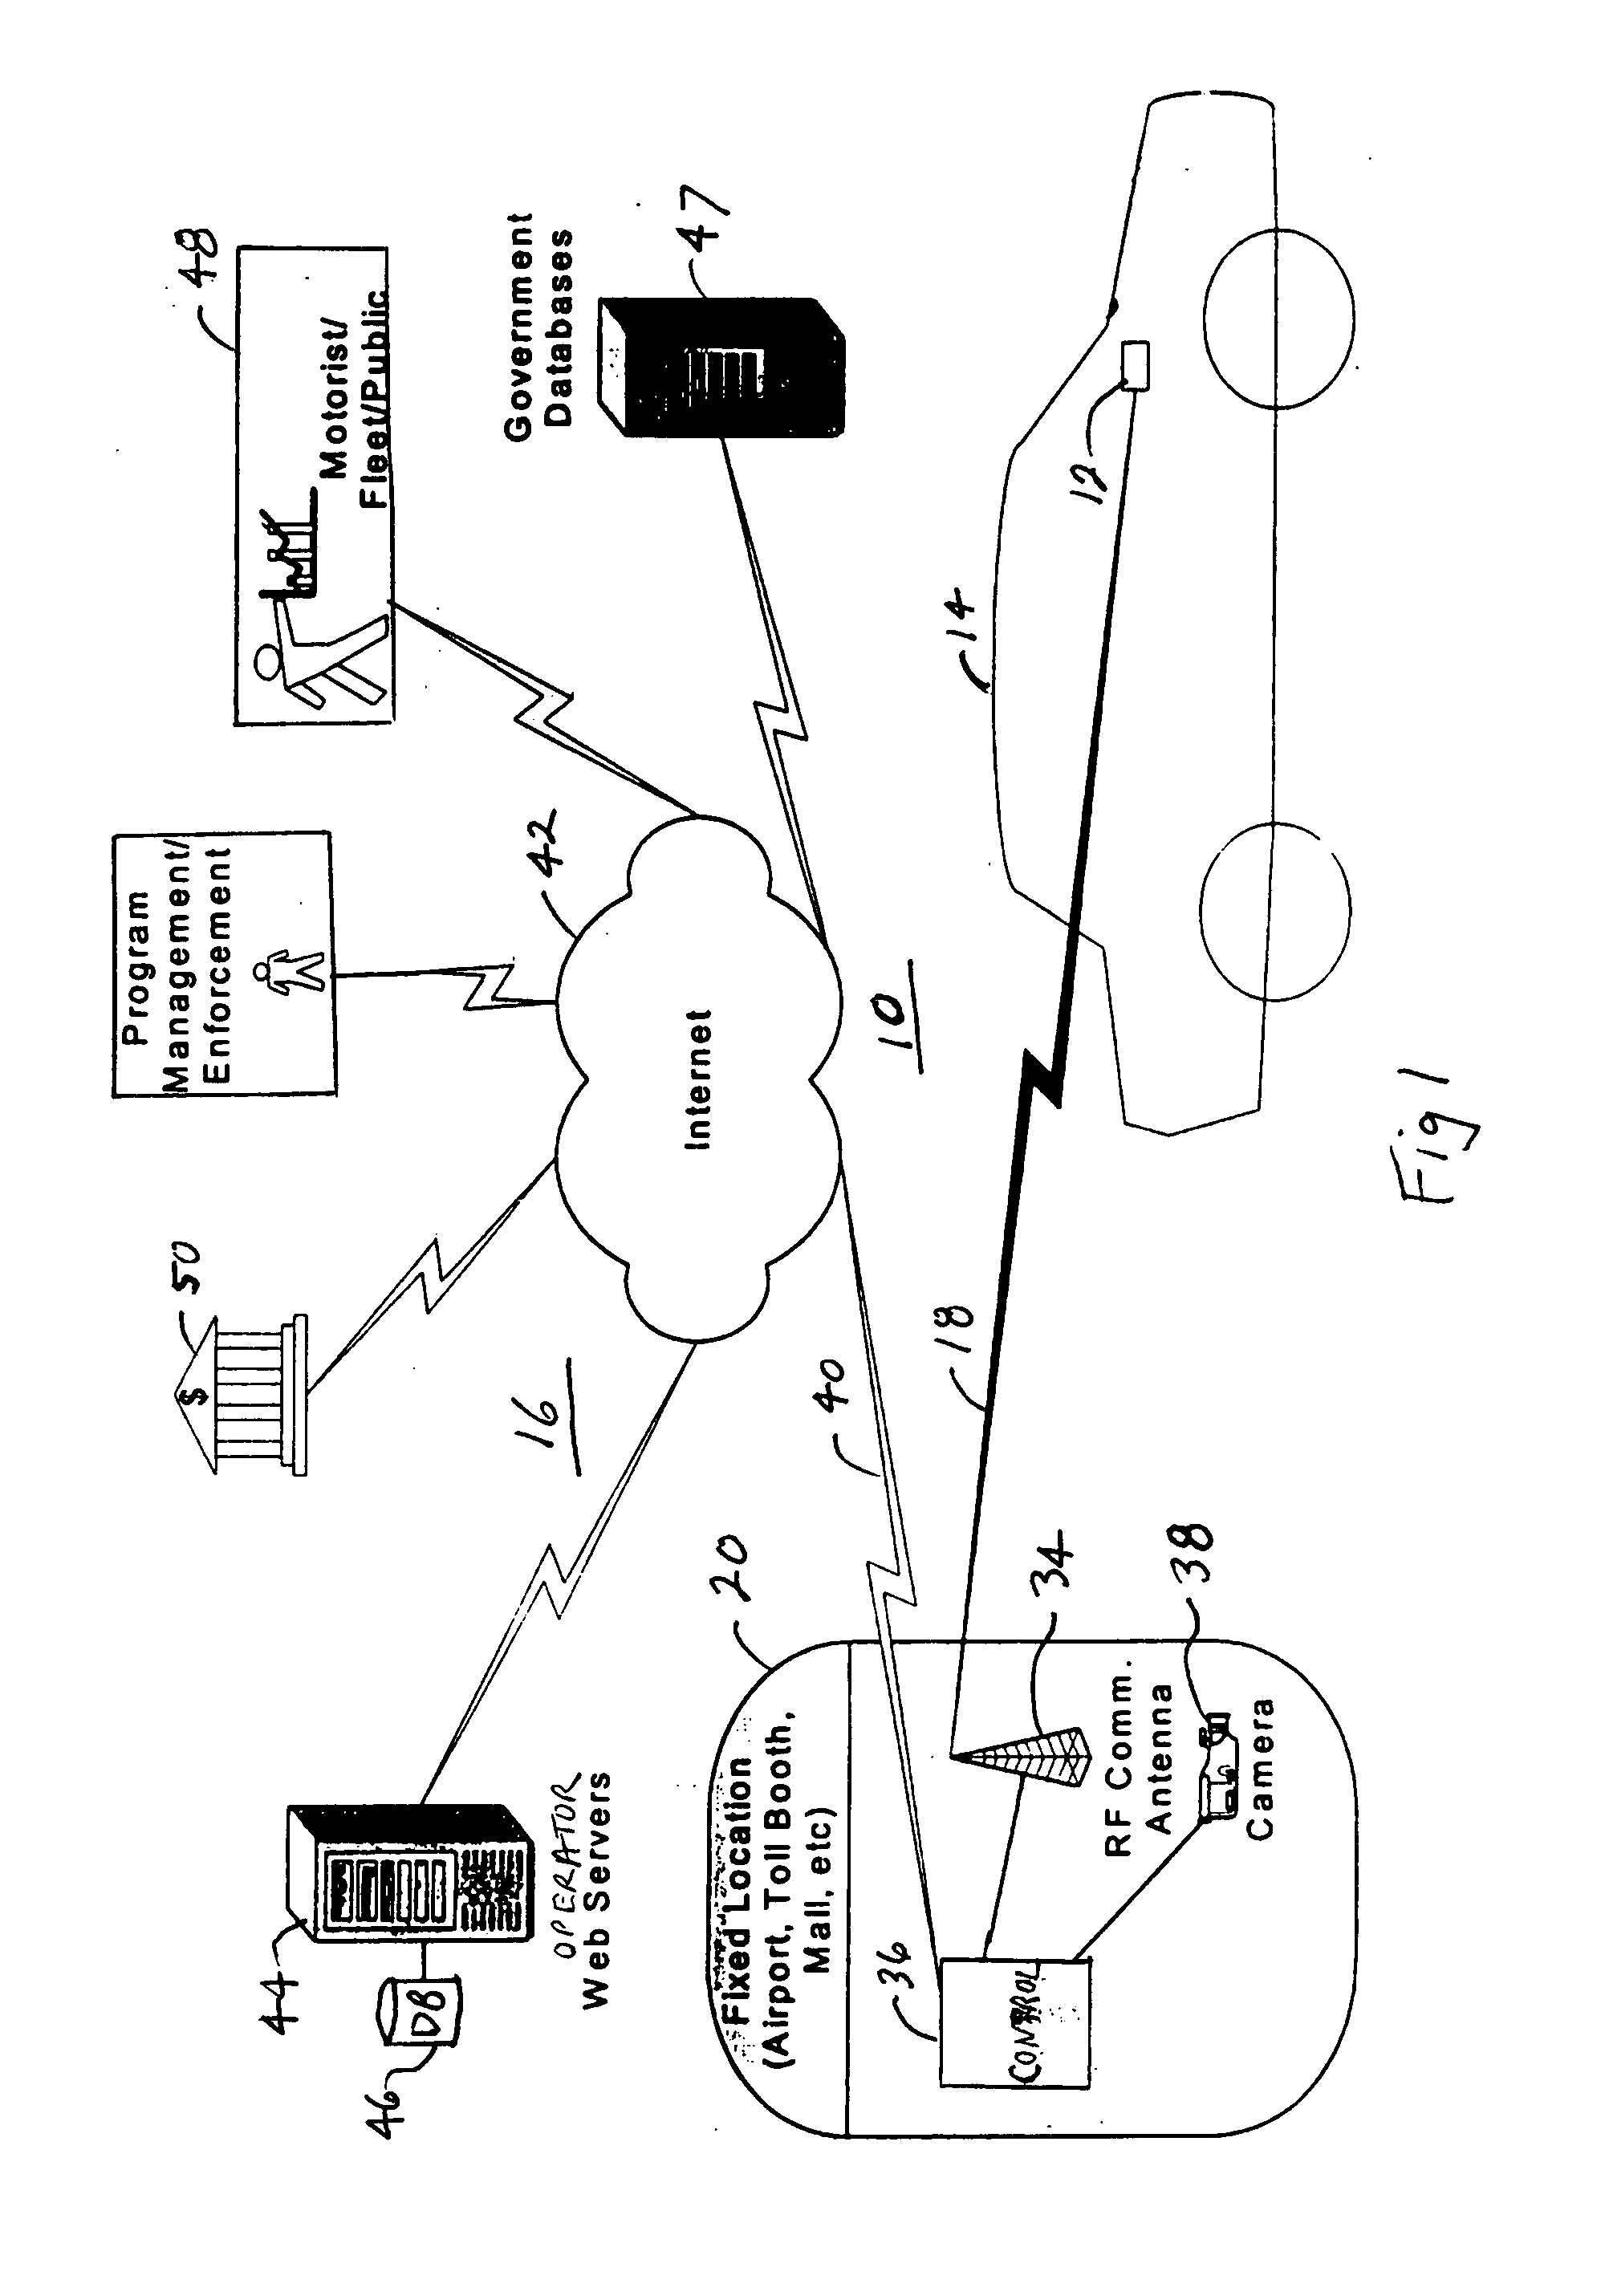 Vehicle environmental regulatory compliance system and method of verifying regulatory compliance of a vehicle